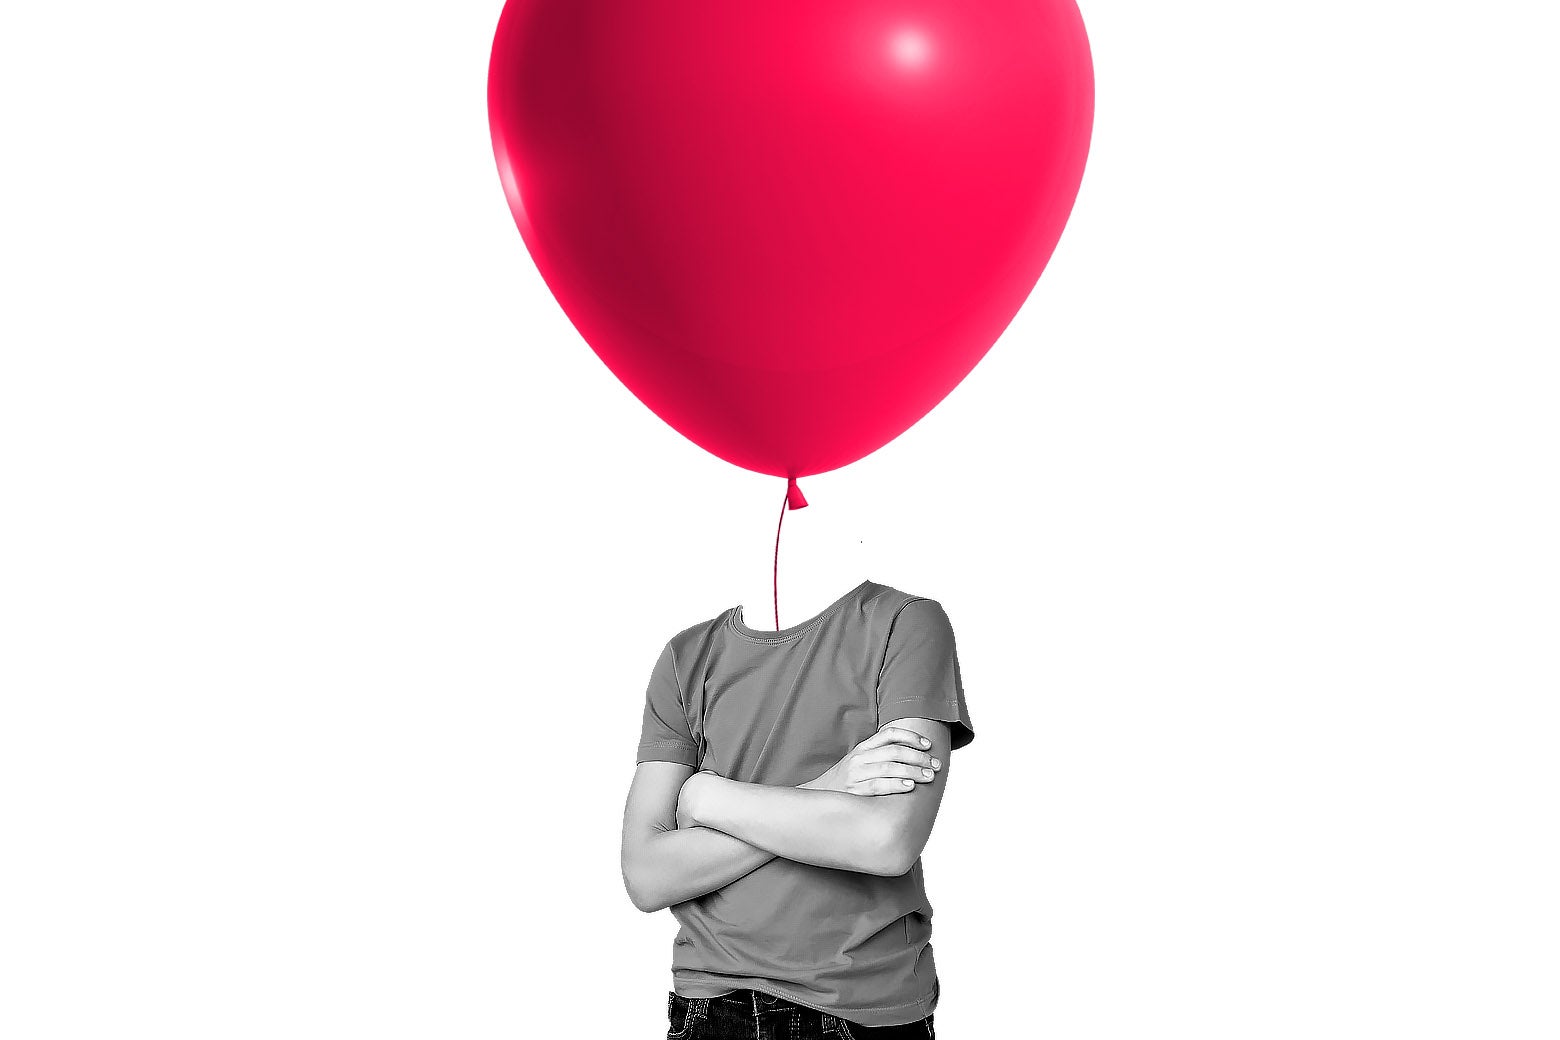 The body of a young boy with a large red balloon floating away representing his head.